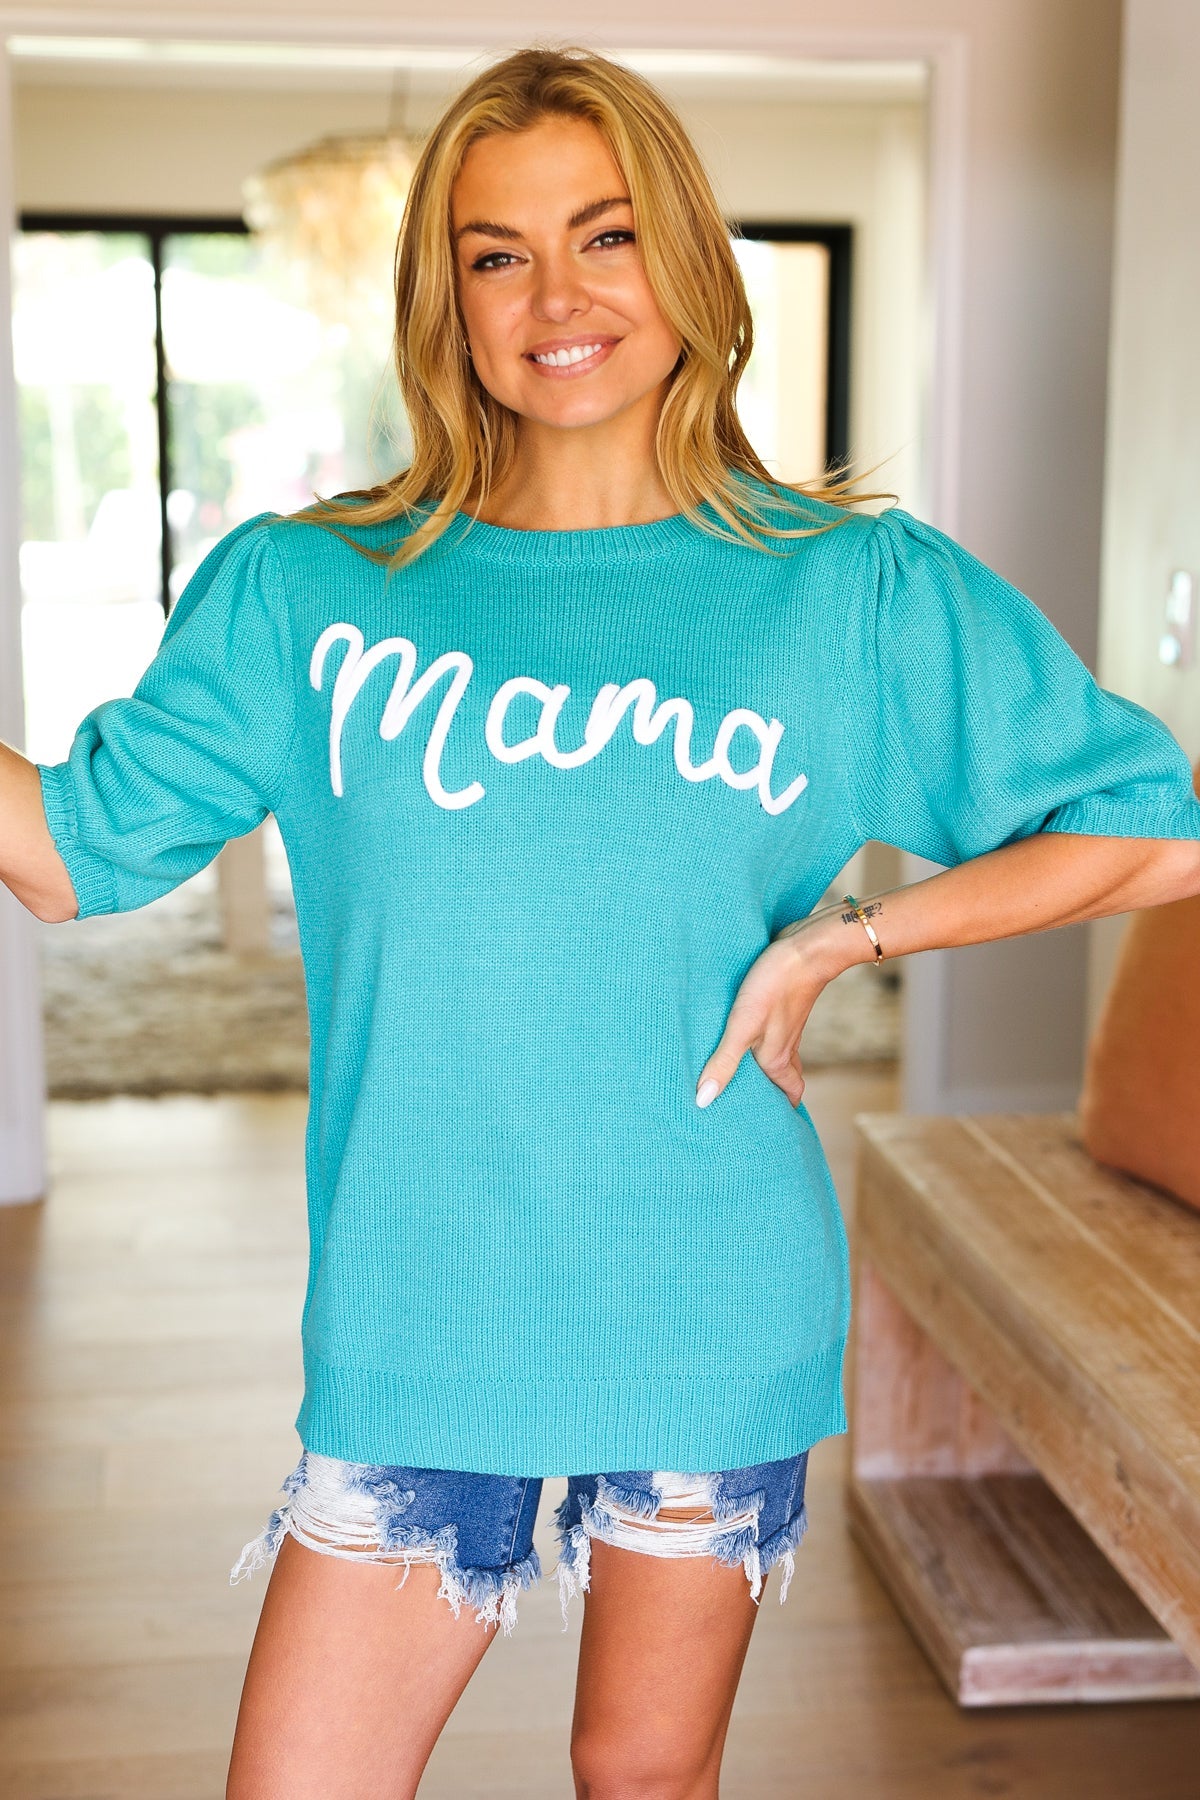 Take A Bow "Mama" Embroidery Pop-Up Top in Mint